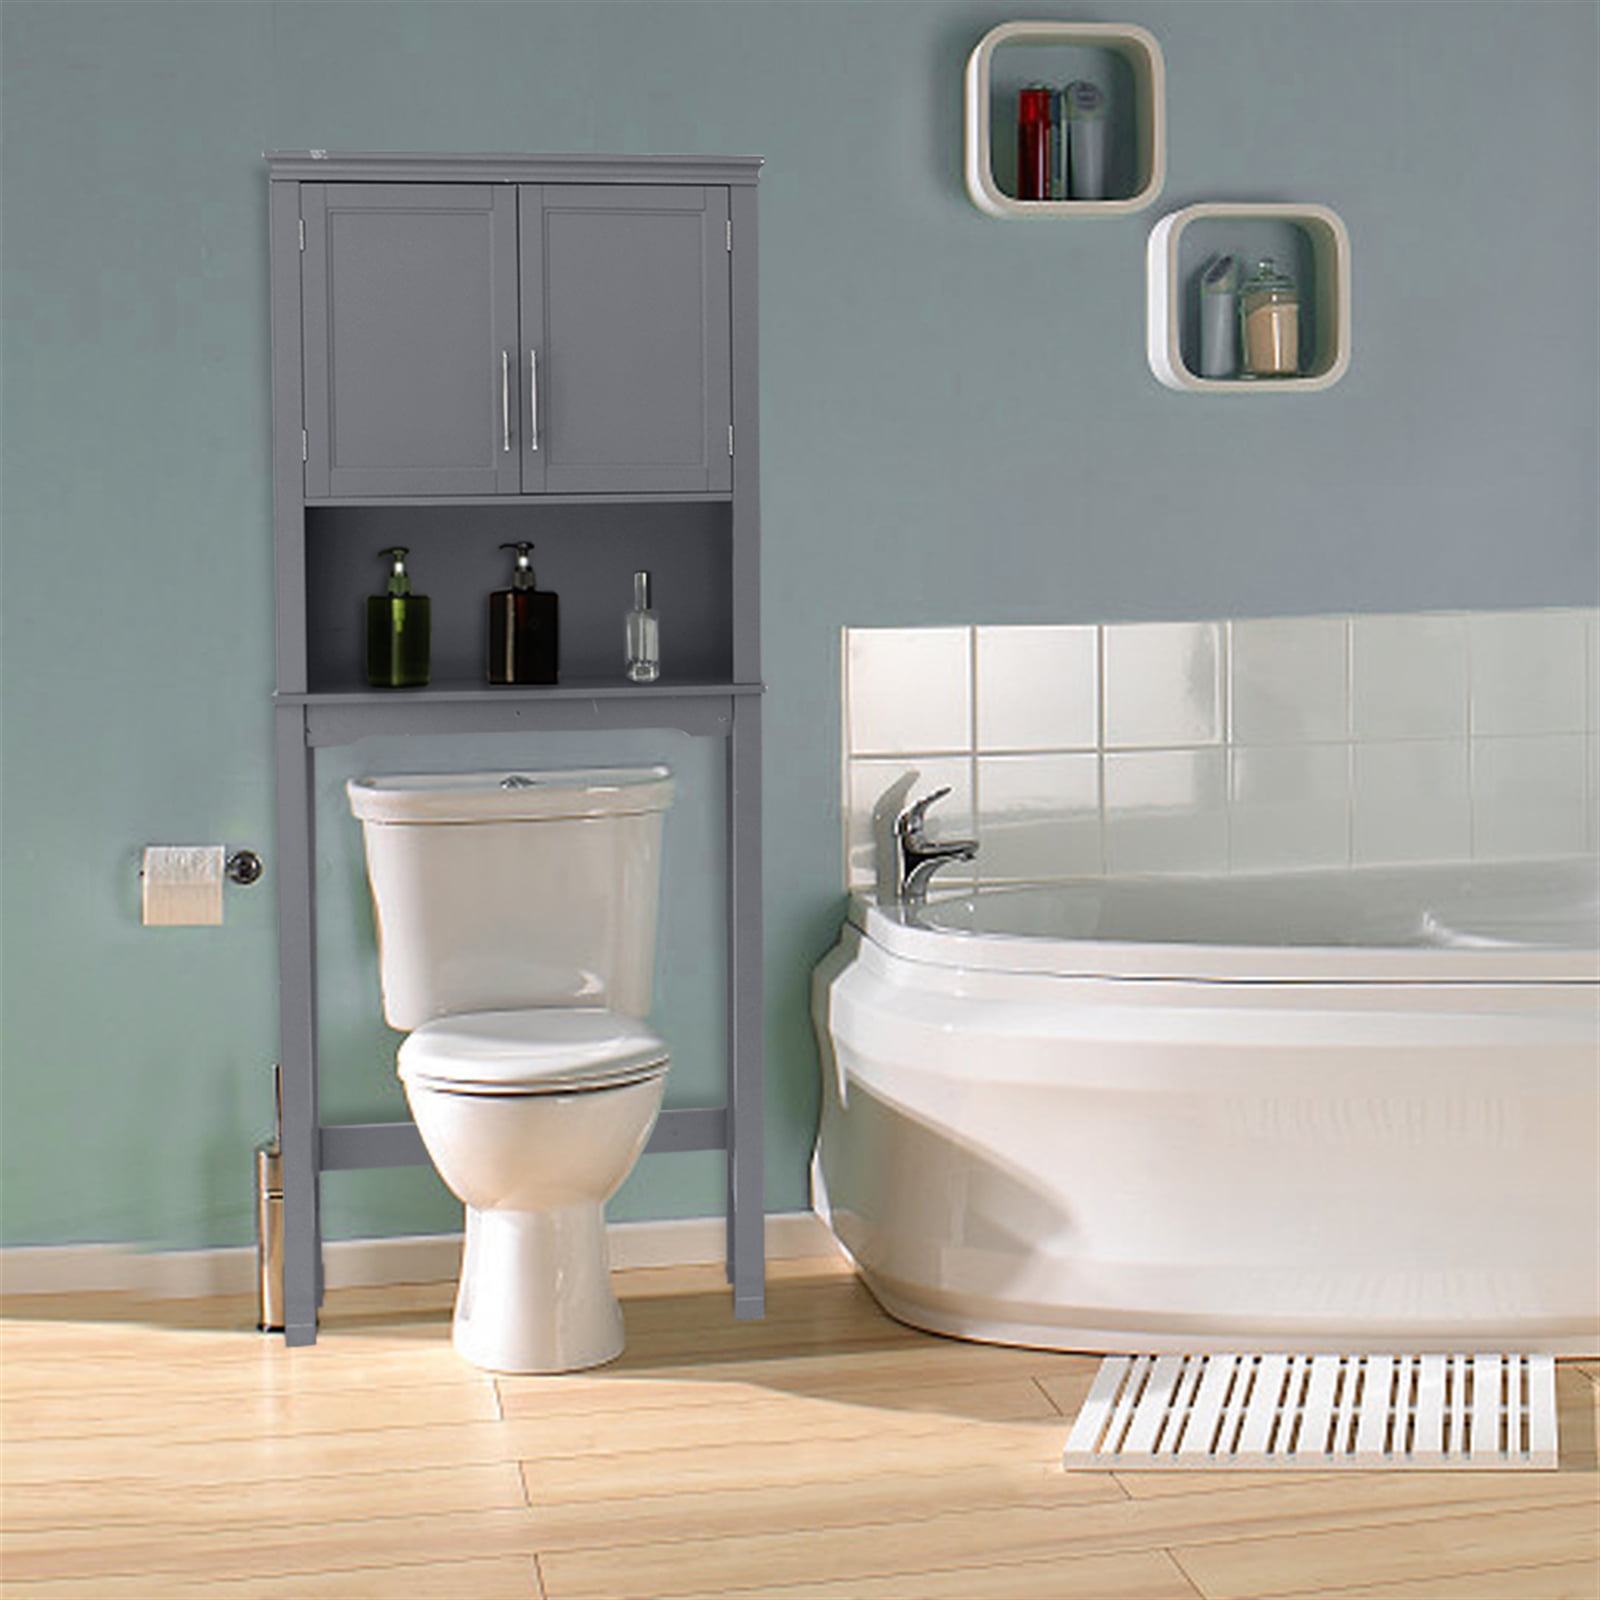 enyopro Over-The-Toilet Space Saver, Bathroom Storage Cabinet, Toilet